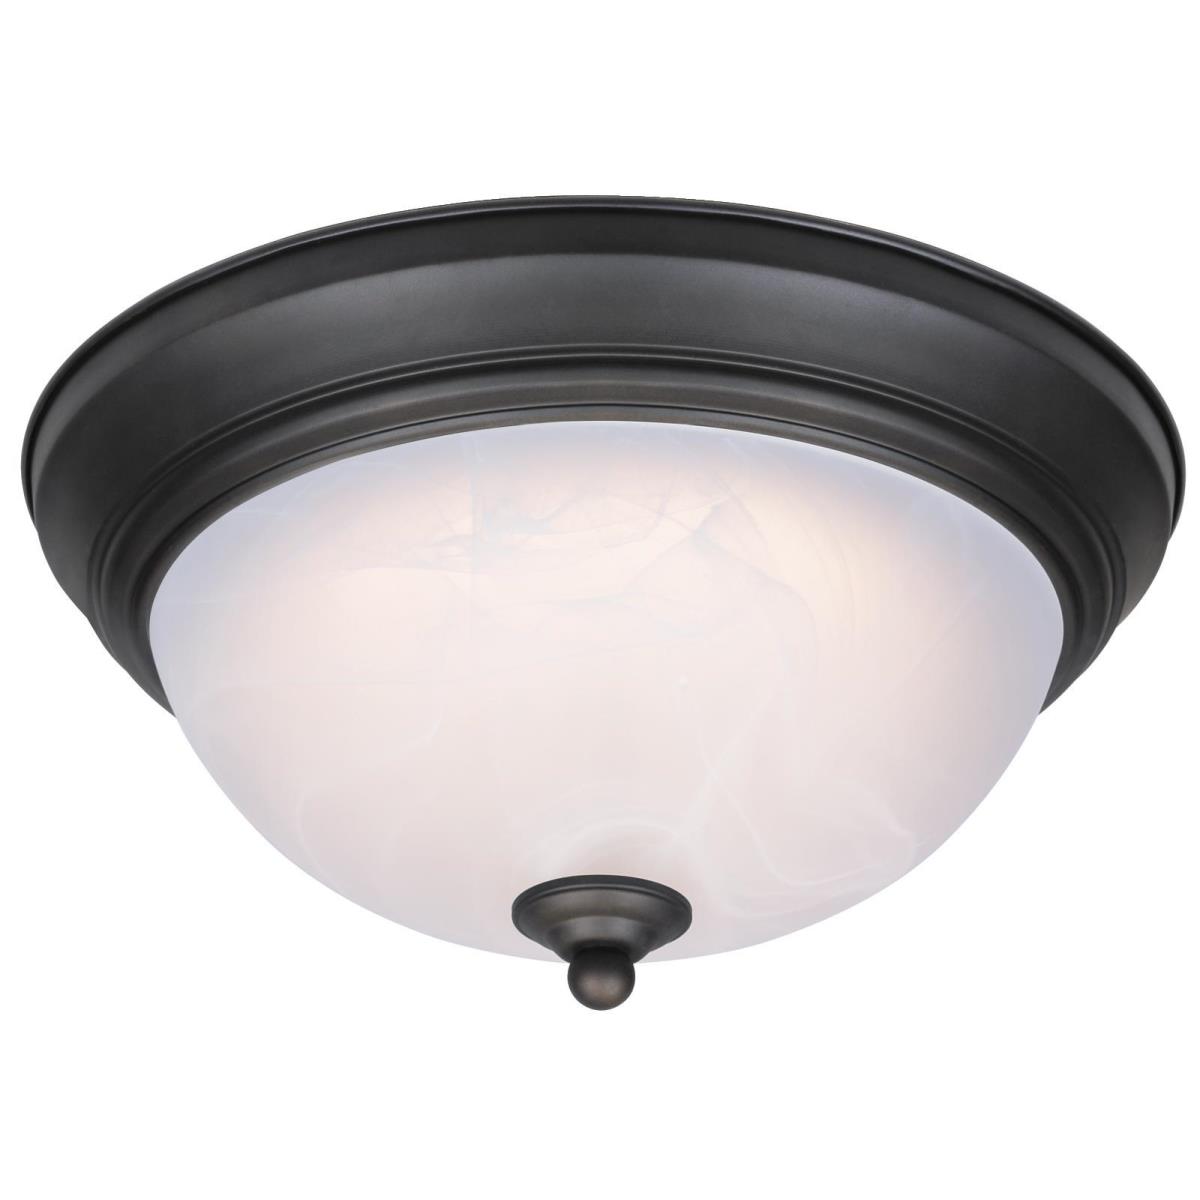 11" LED Flush Oil Rubbed Bronze Finish with White Alabaster Glass